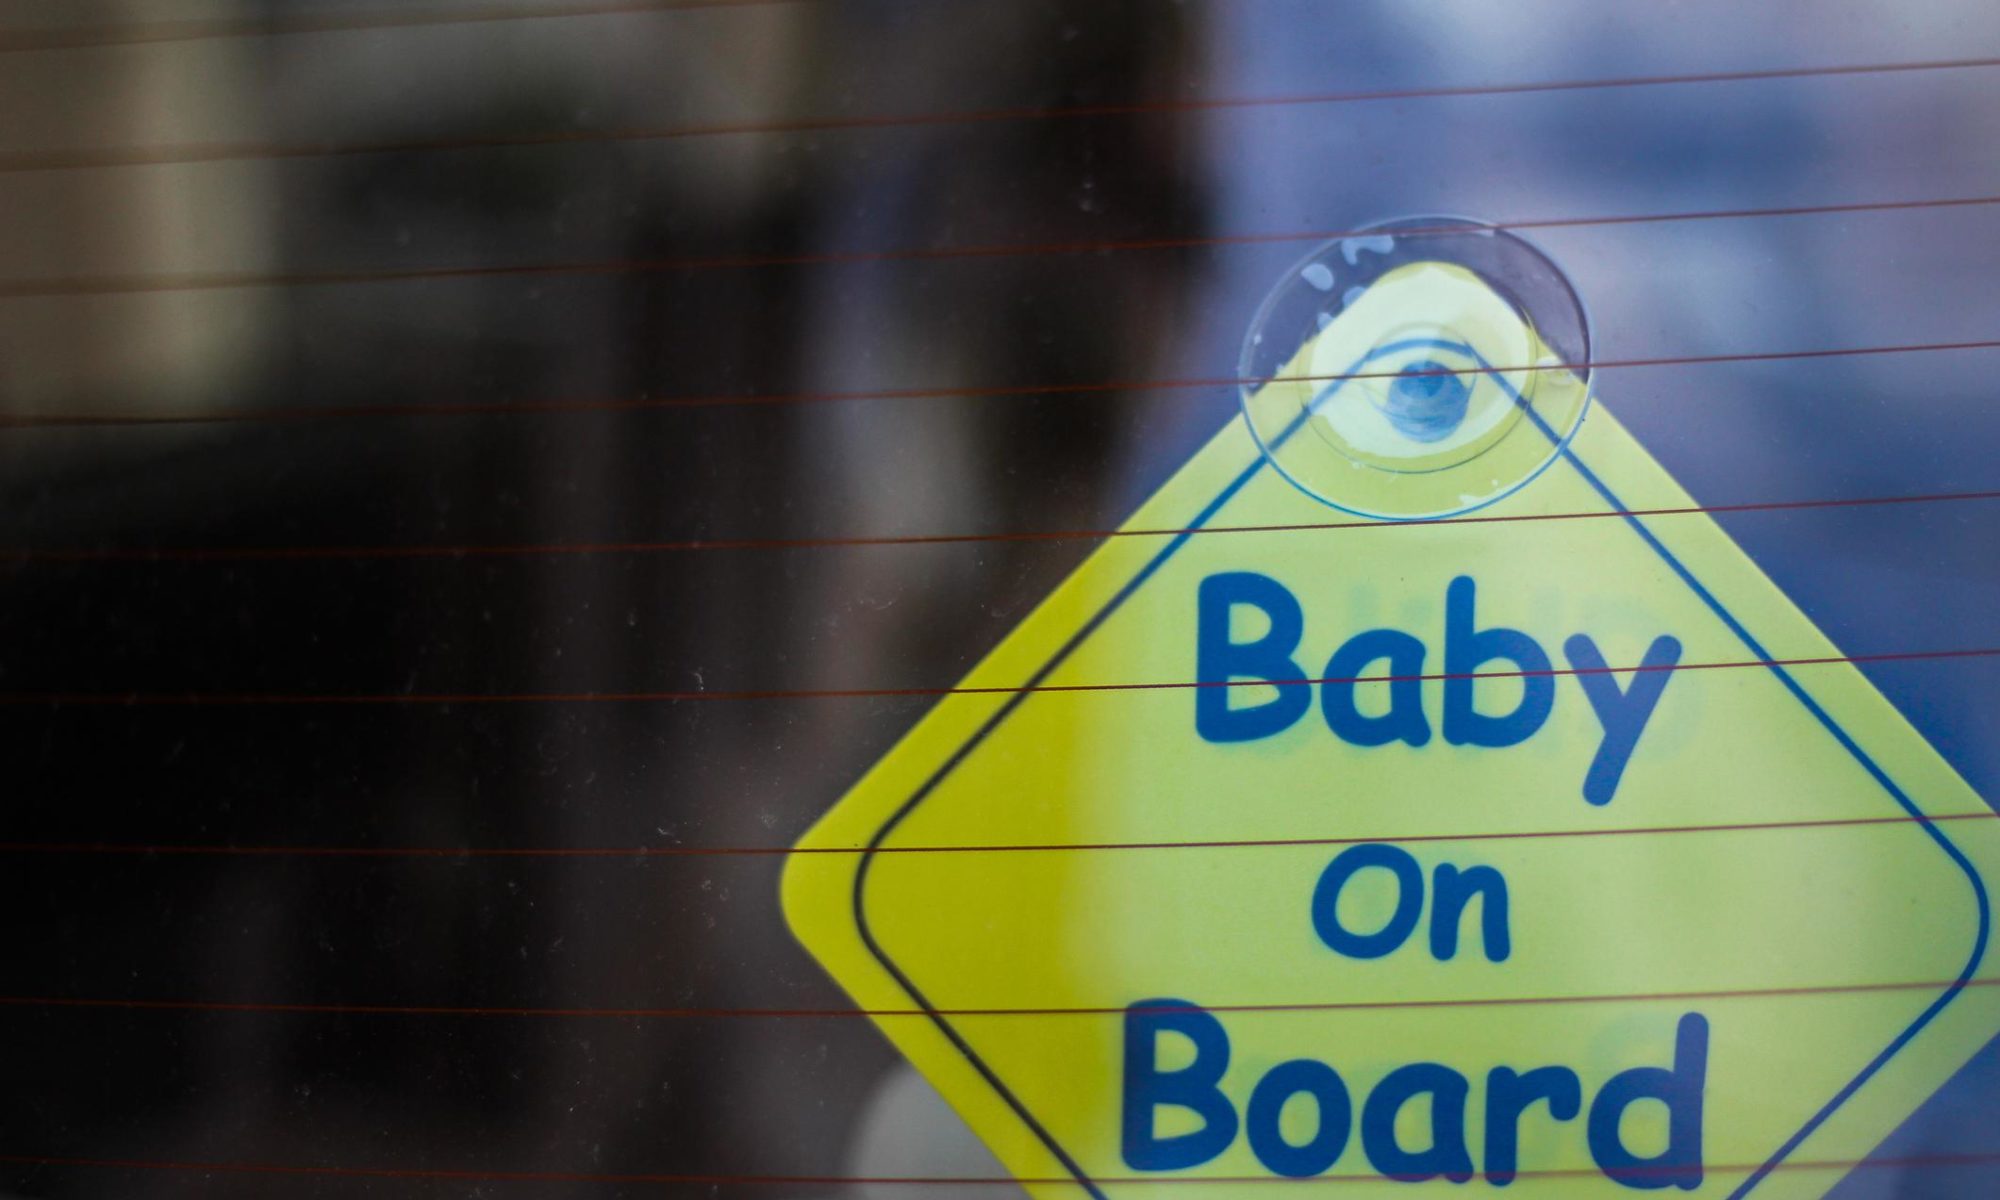 Baby on Board? Follow These 4 Safe Driving Tips. | Ted B. Lyon & Associates | iStock-1257267847